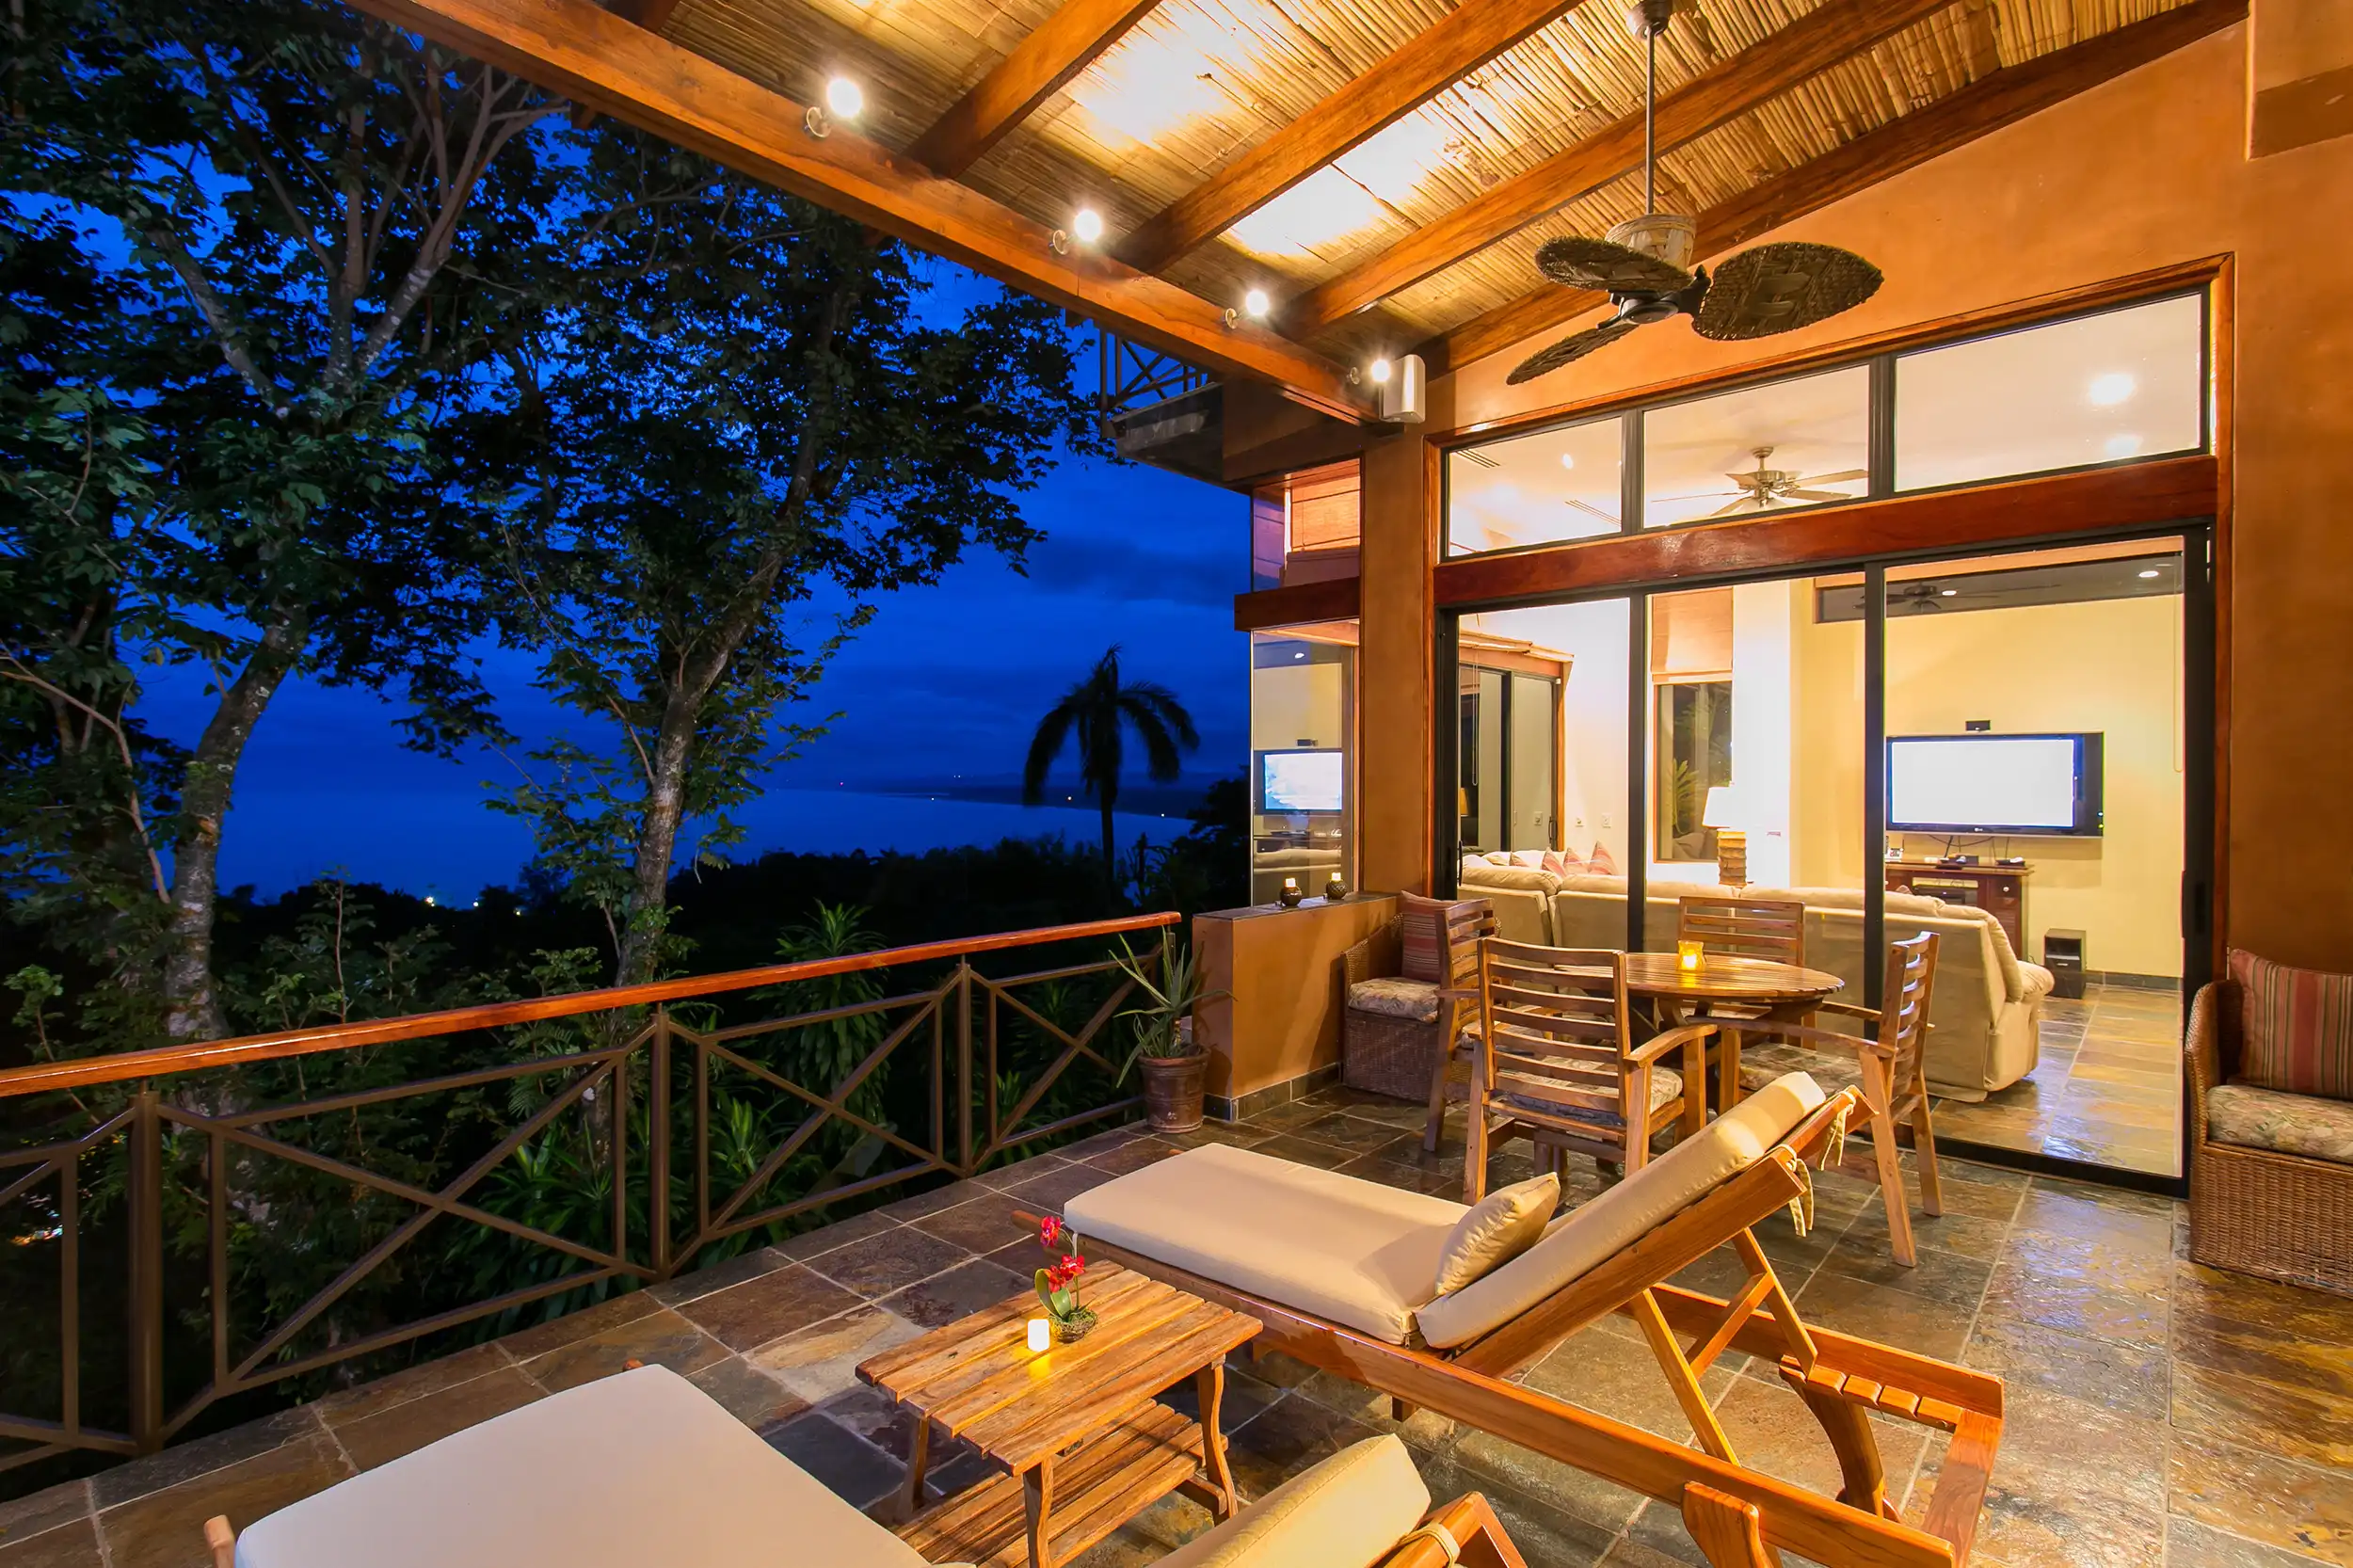 Featured image for “Casa Reserva – An Ideal Tropical Accommodation”